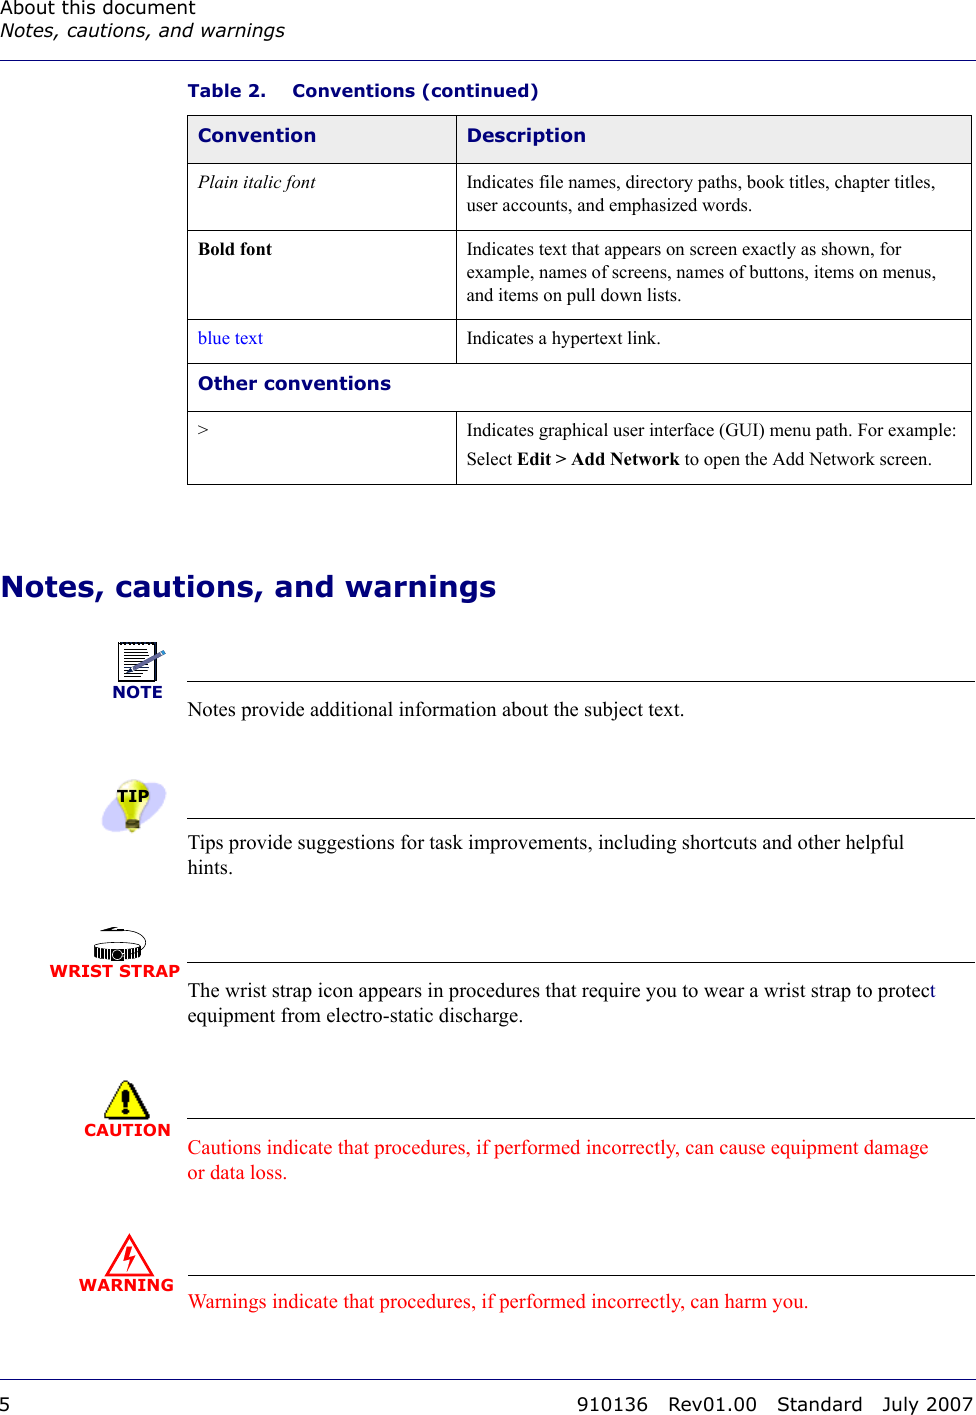 About this documentNotes, cautions, and warnings5 910136 Rev01.00 Standard July 2007Notes, cautions, and warningsNOTENotes provide additional information about the subject text.TIPTips provide suggestions for task improvements, including shortcuts and other helpful hints.WRIST STRAPThe wrist strap icon appears in procedures that require you to wear a wrist strap to protect equipment from electro-static discharge.CAUTIONCautions indicate that procedures, if performed incorrectly, can cause equipment damage or data loss.WARNINGWarnings indicate that procedures, if performed incorrectly, can harm you.Plain italic font Indicates file names, directory paths, book titles, chapter titles, user accounts, and emphasized words.Bold font Indicates text that appears on screen exactly as shown, for example, names of screens, names of buttons, items on menus, and items on pull down lists. blue text Indicates a hypertext link.Other conventions&gt; Indicates graphical user interface (GUI) menu path. For example:Select Edit &gt; Add Network to open the Add Network screen.Table 2. Conventions (continued)Convention Description